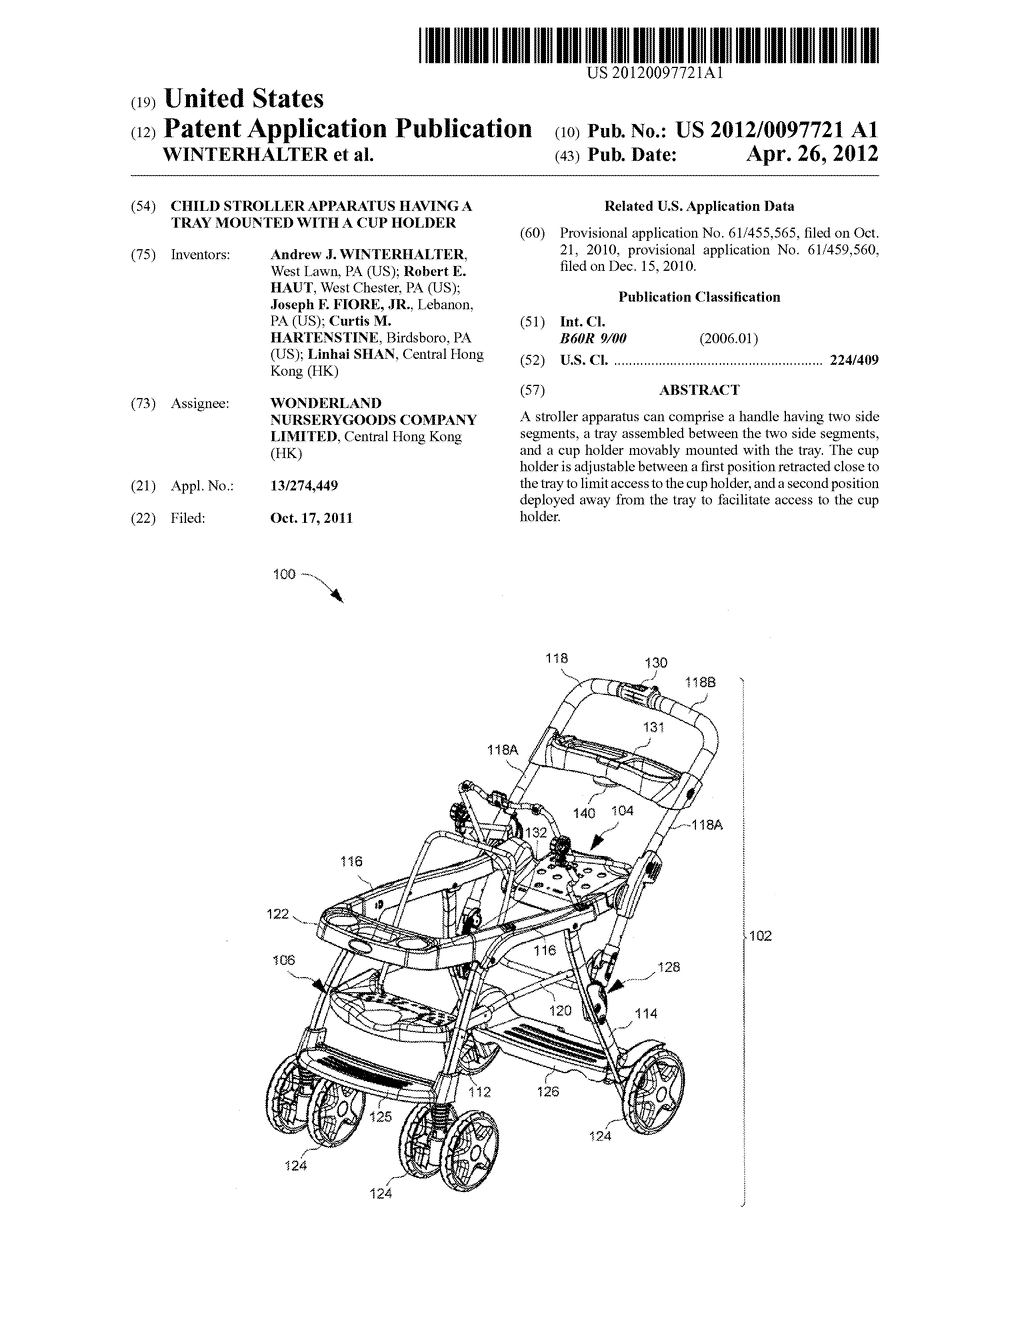 Child Stroller Apparatus Having a Tray Mounted with a Cup Holder - diagram, schematic, and image 01